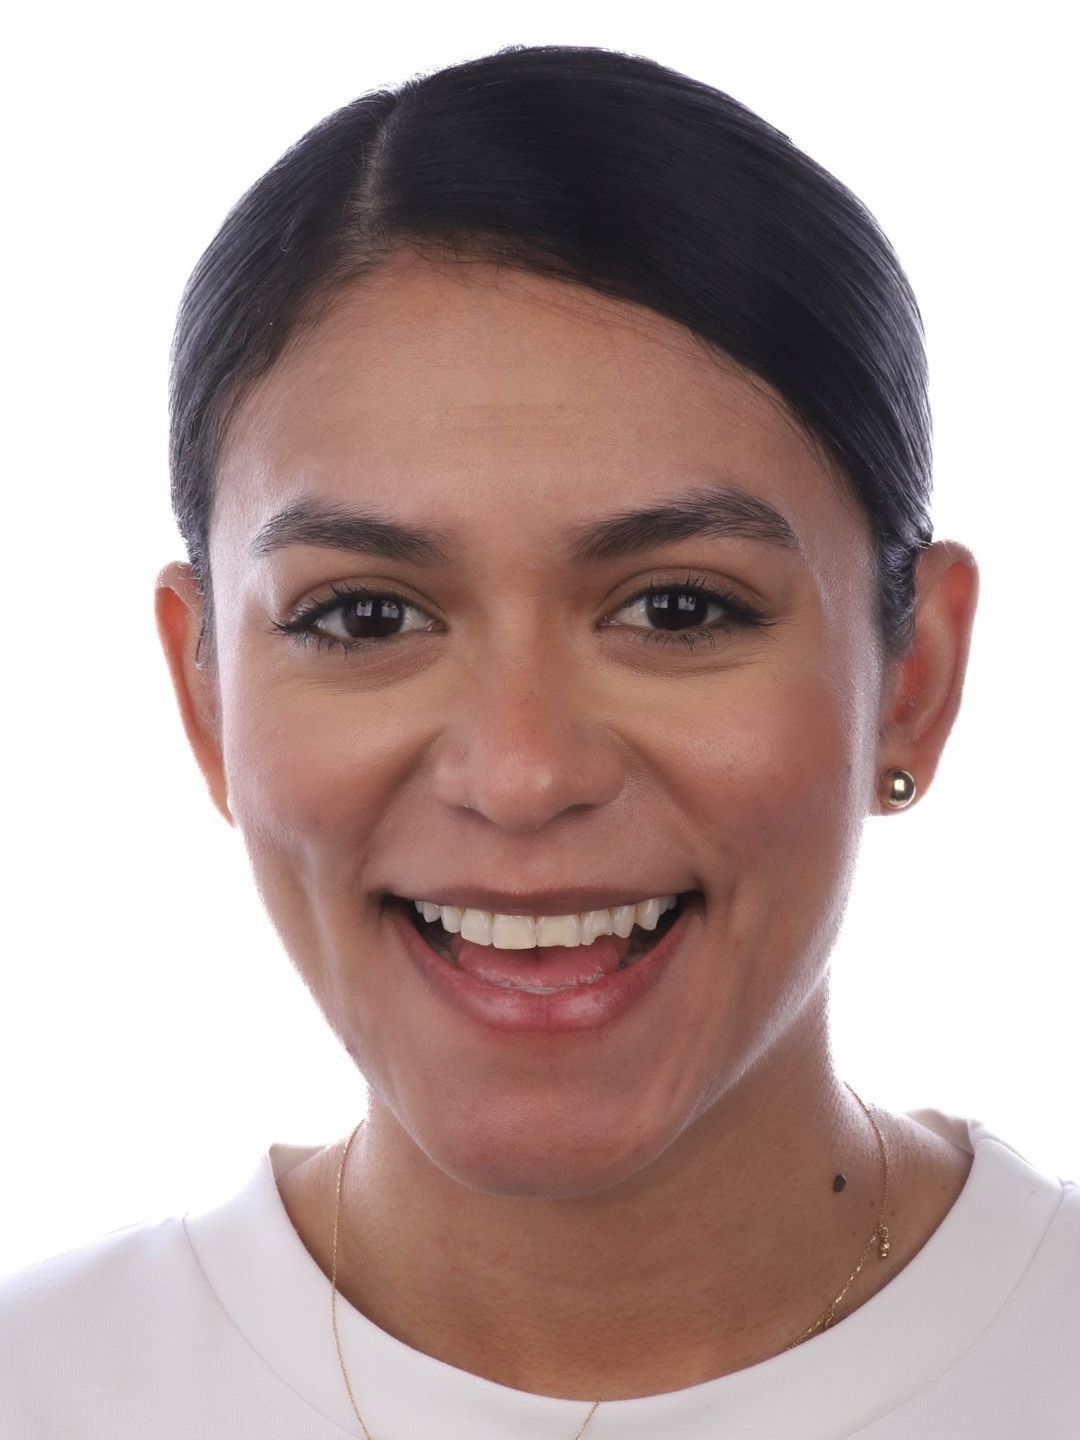 A woman wearing a white shirt and earrings smiles for the camera